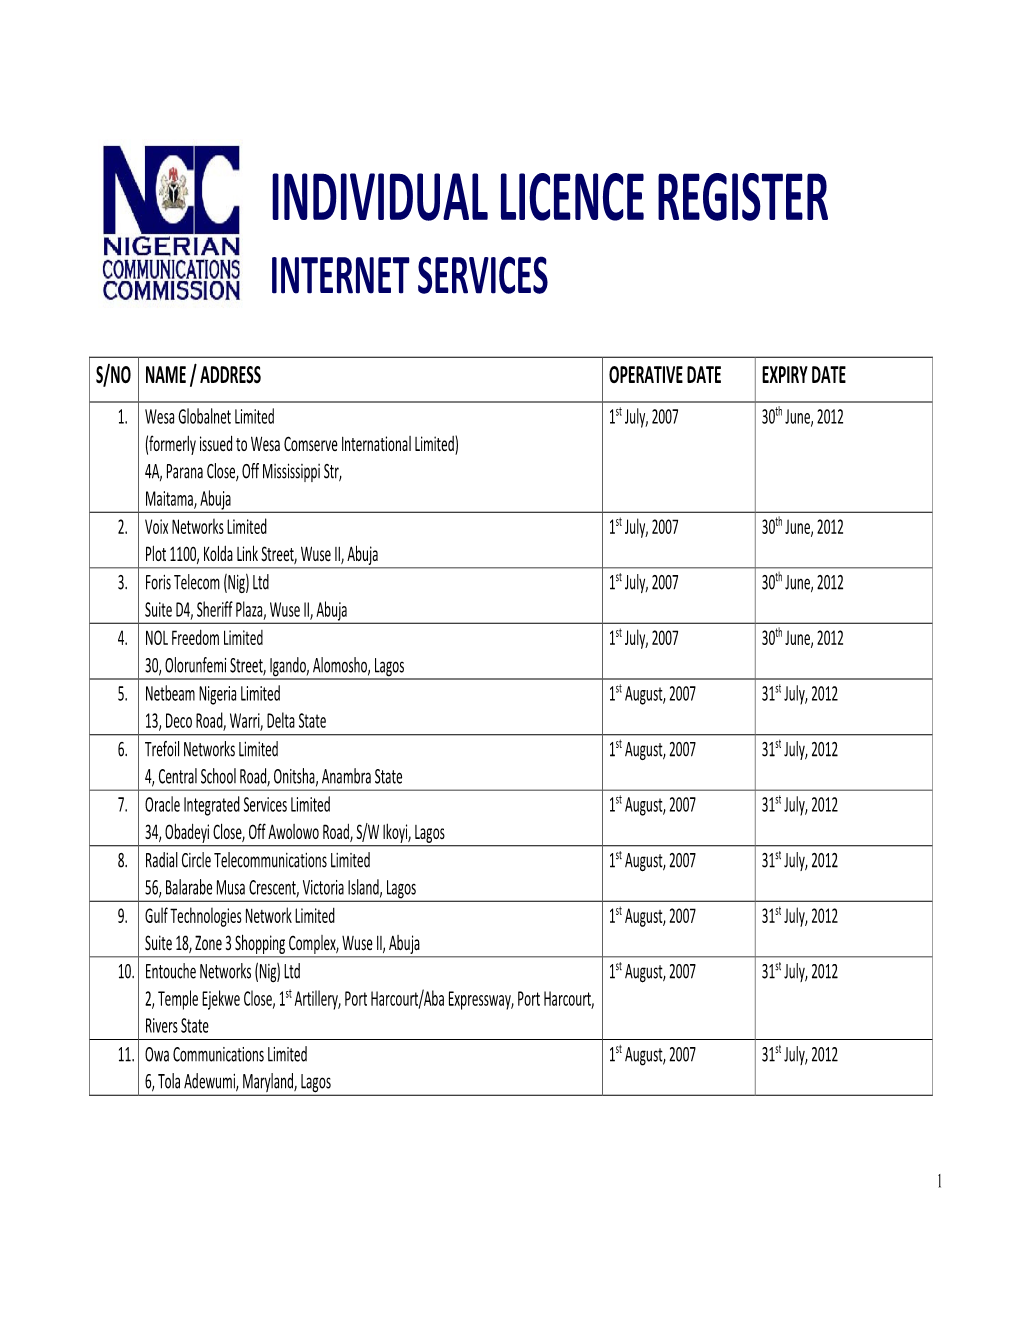 Individual Licence Register Internet Services